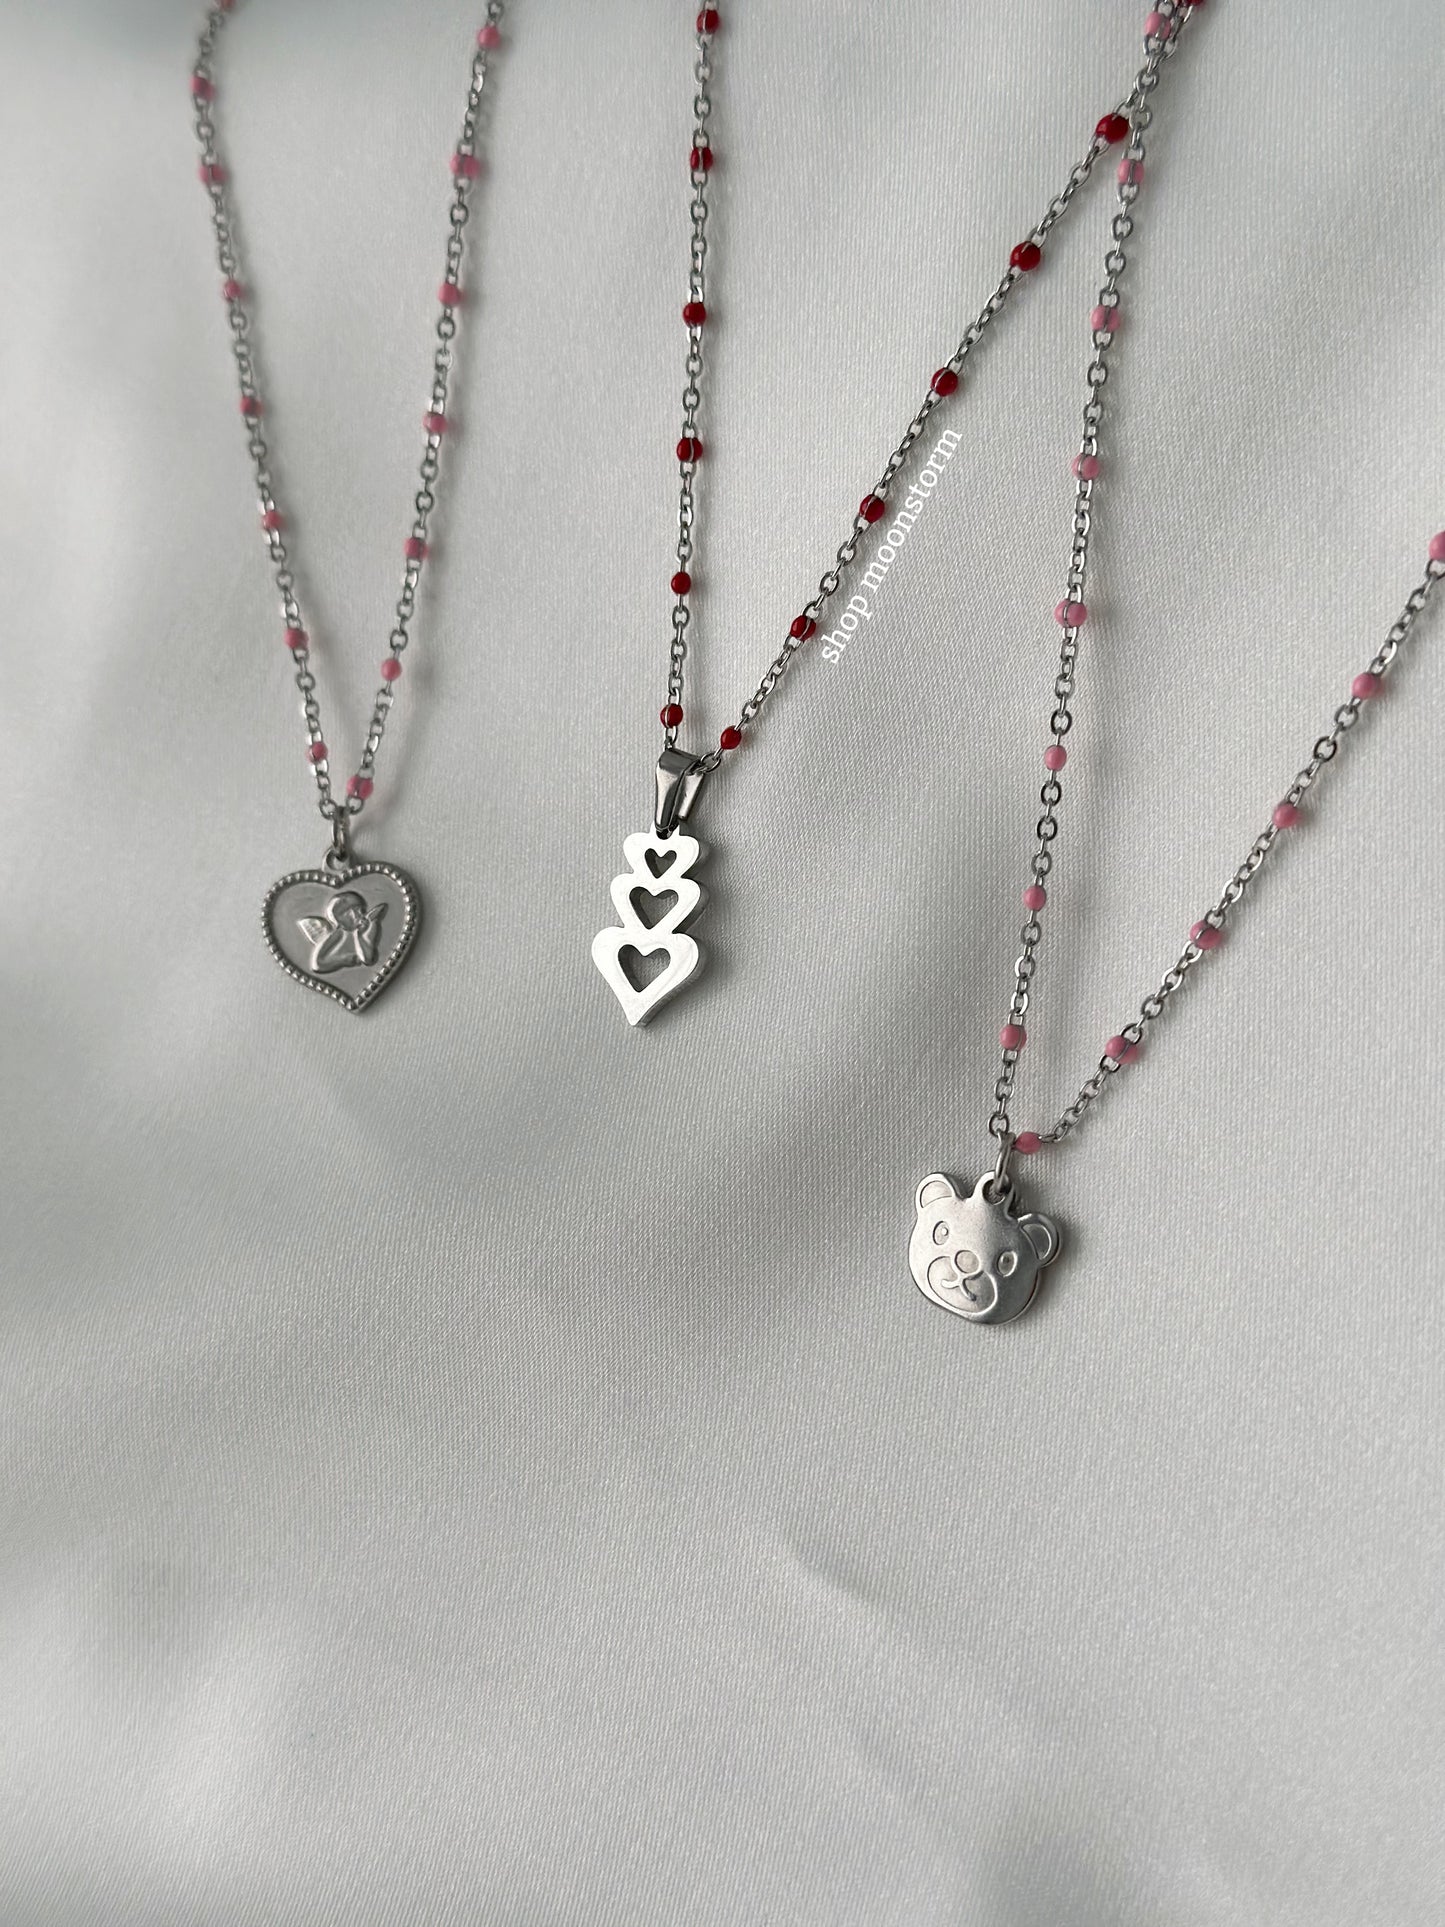 Triple Heart Beaded Necklace (Limited Edition)